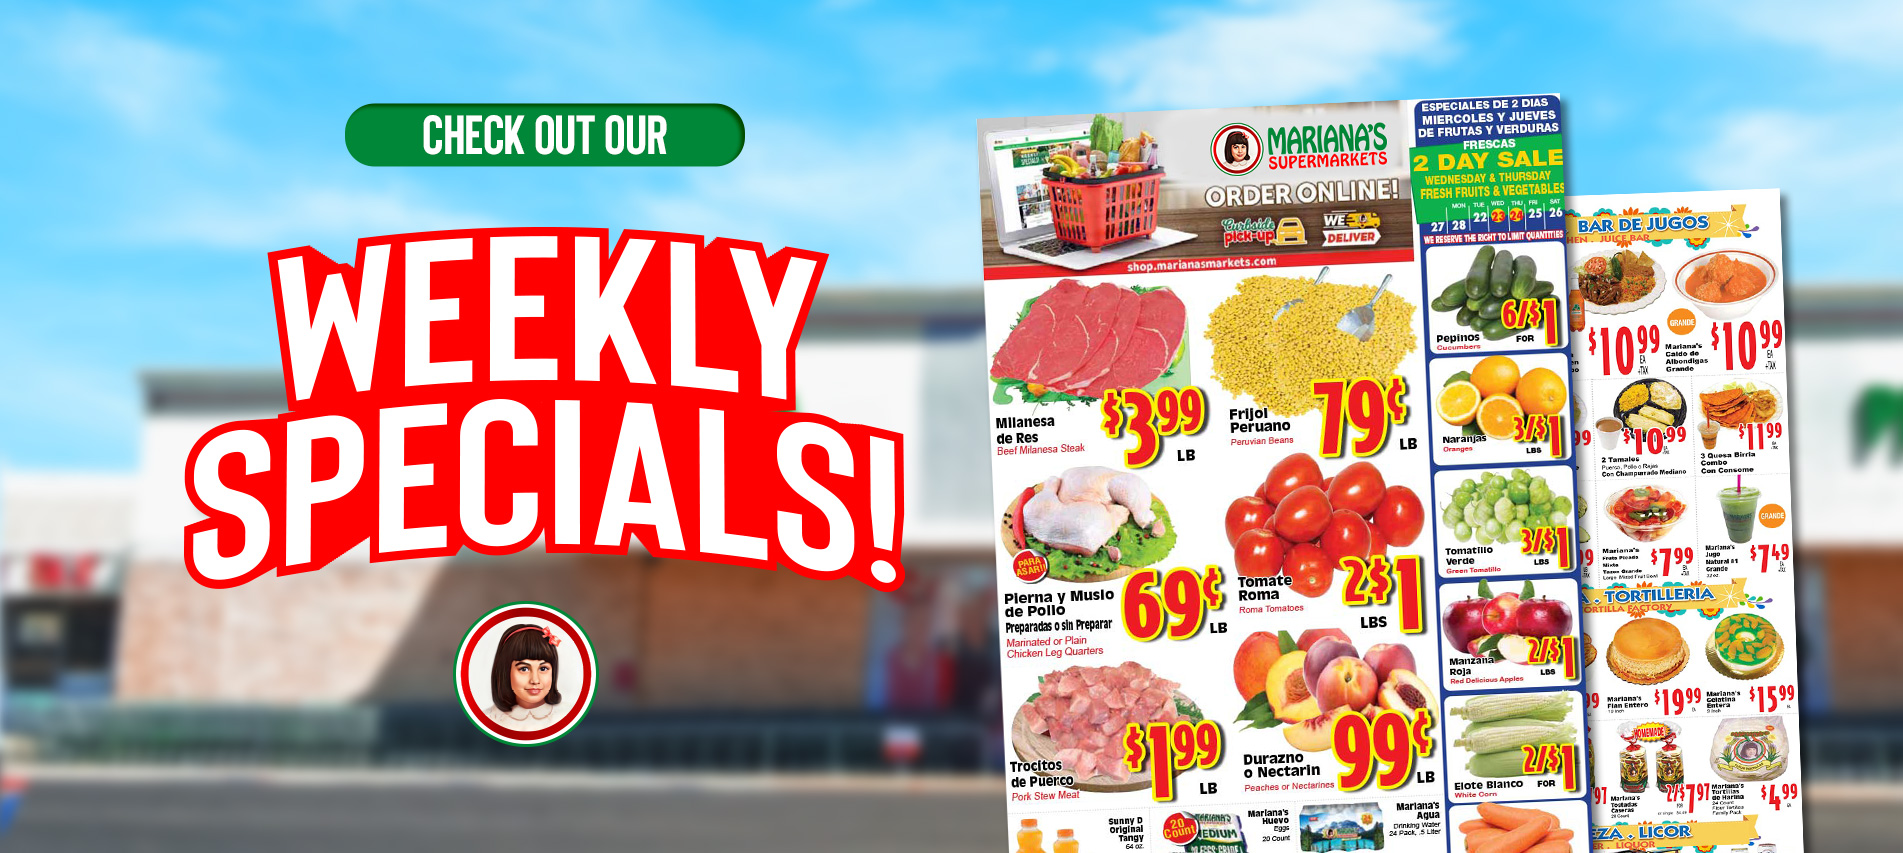 Check out our weekly specials